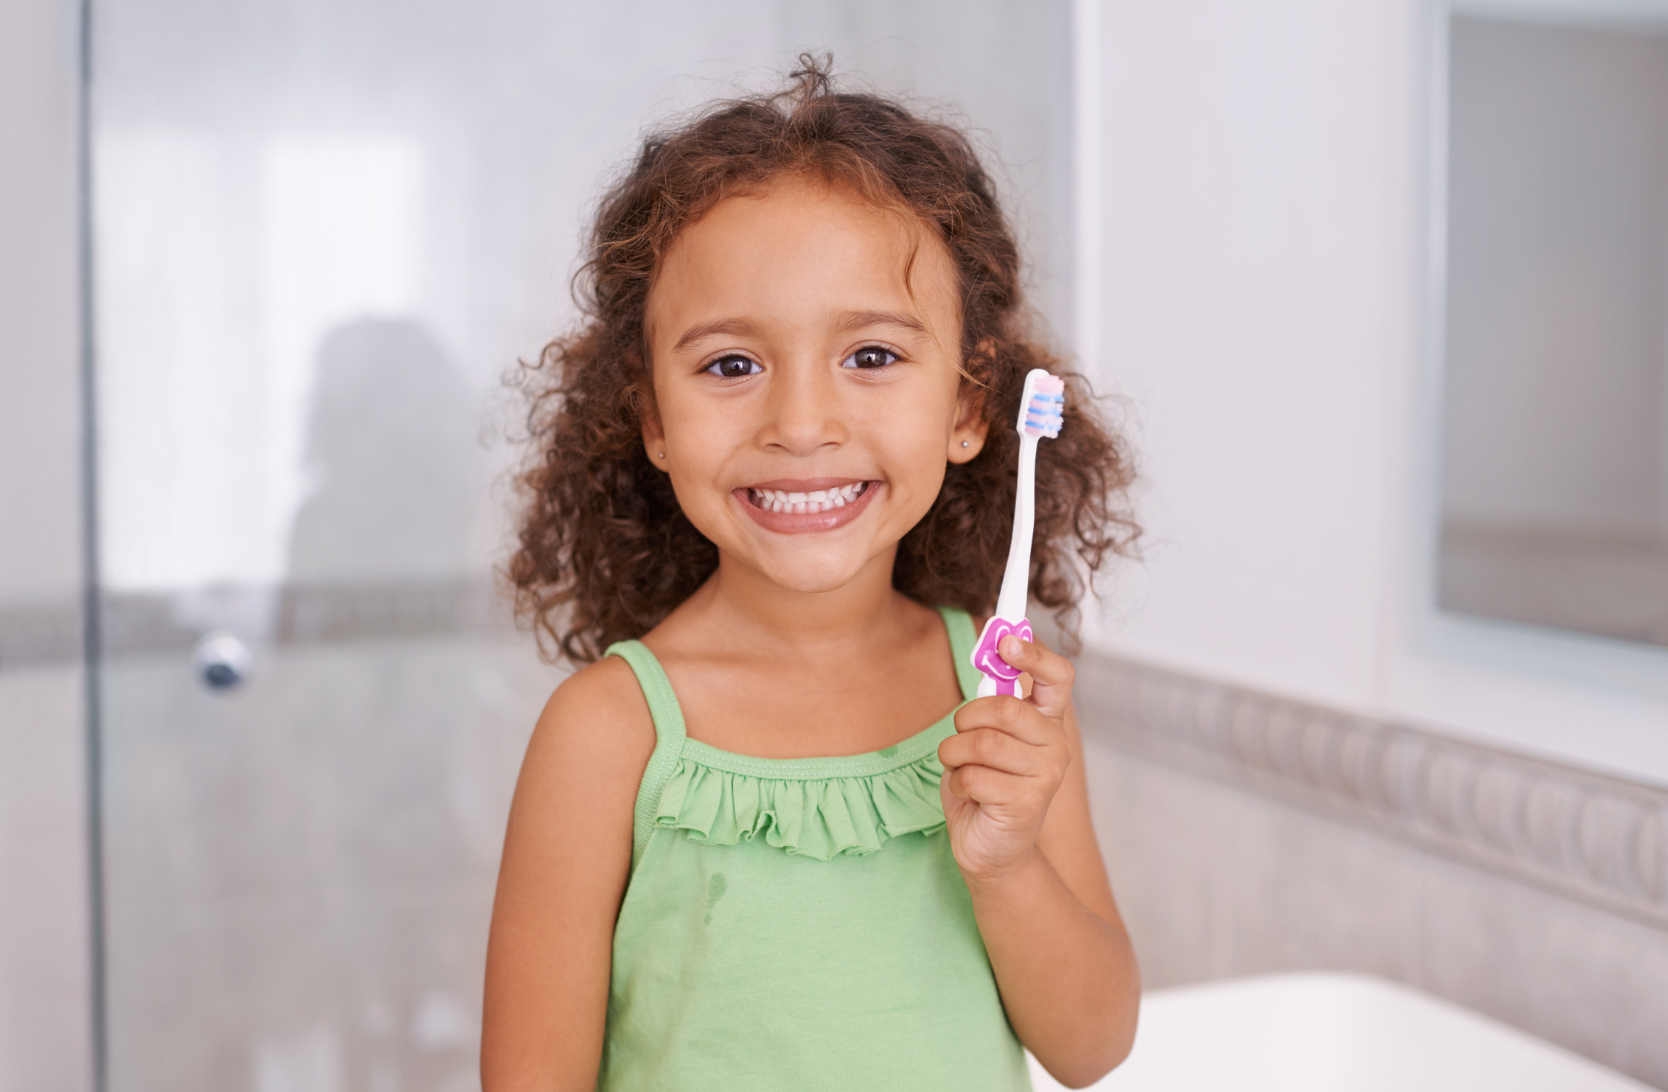 Young girl with big smile holding toothbrush